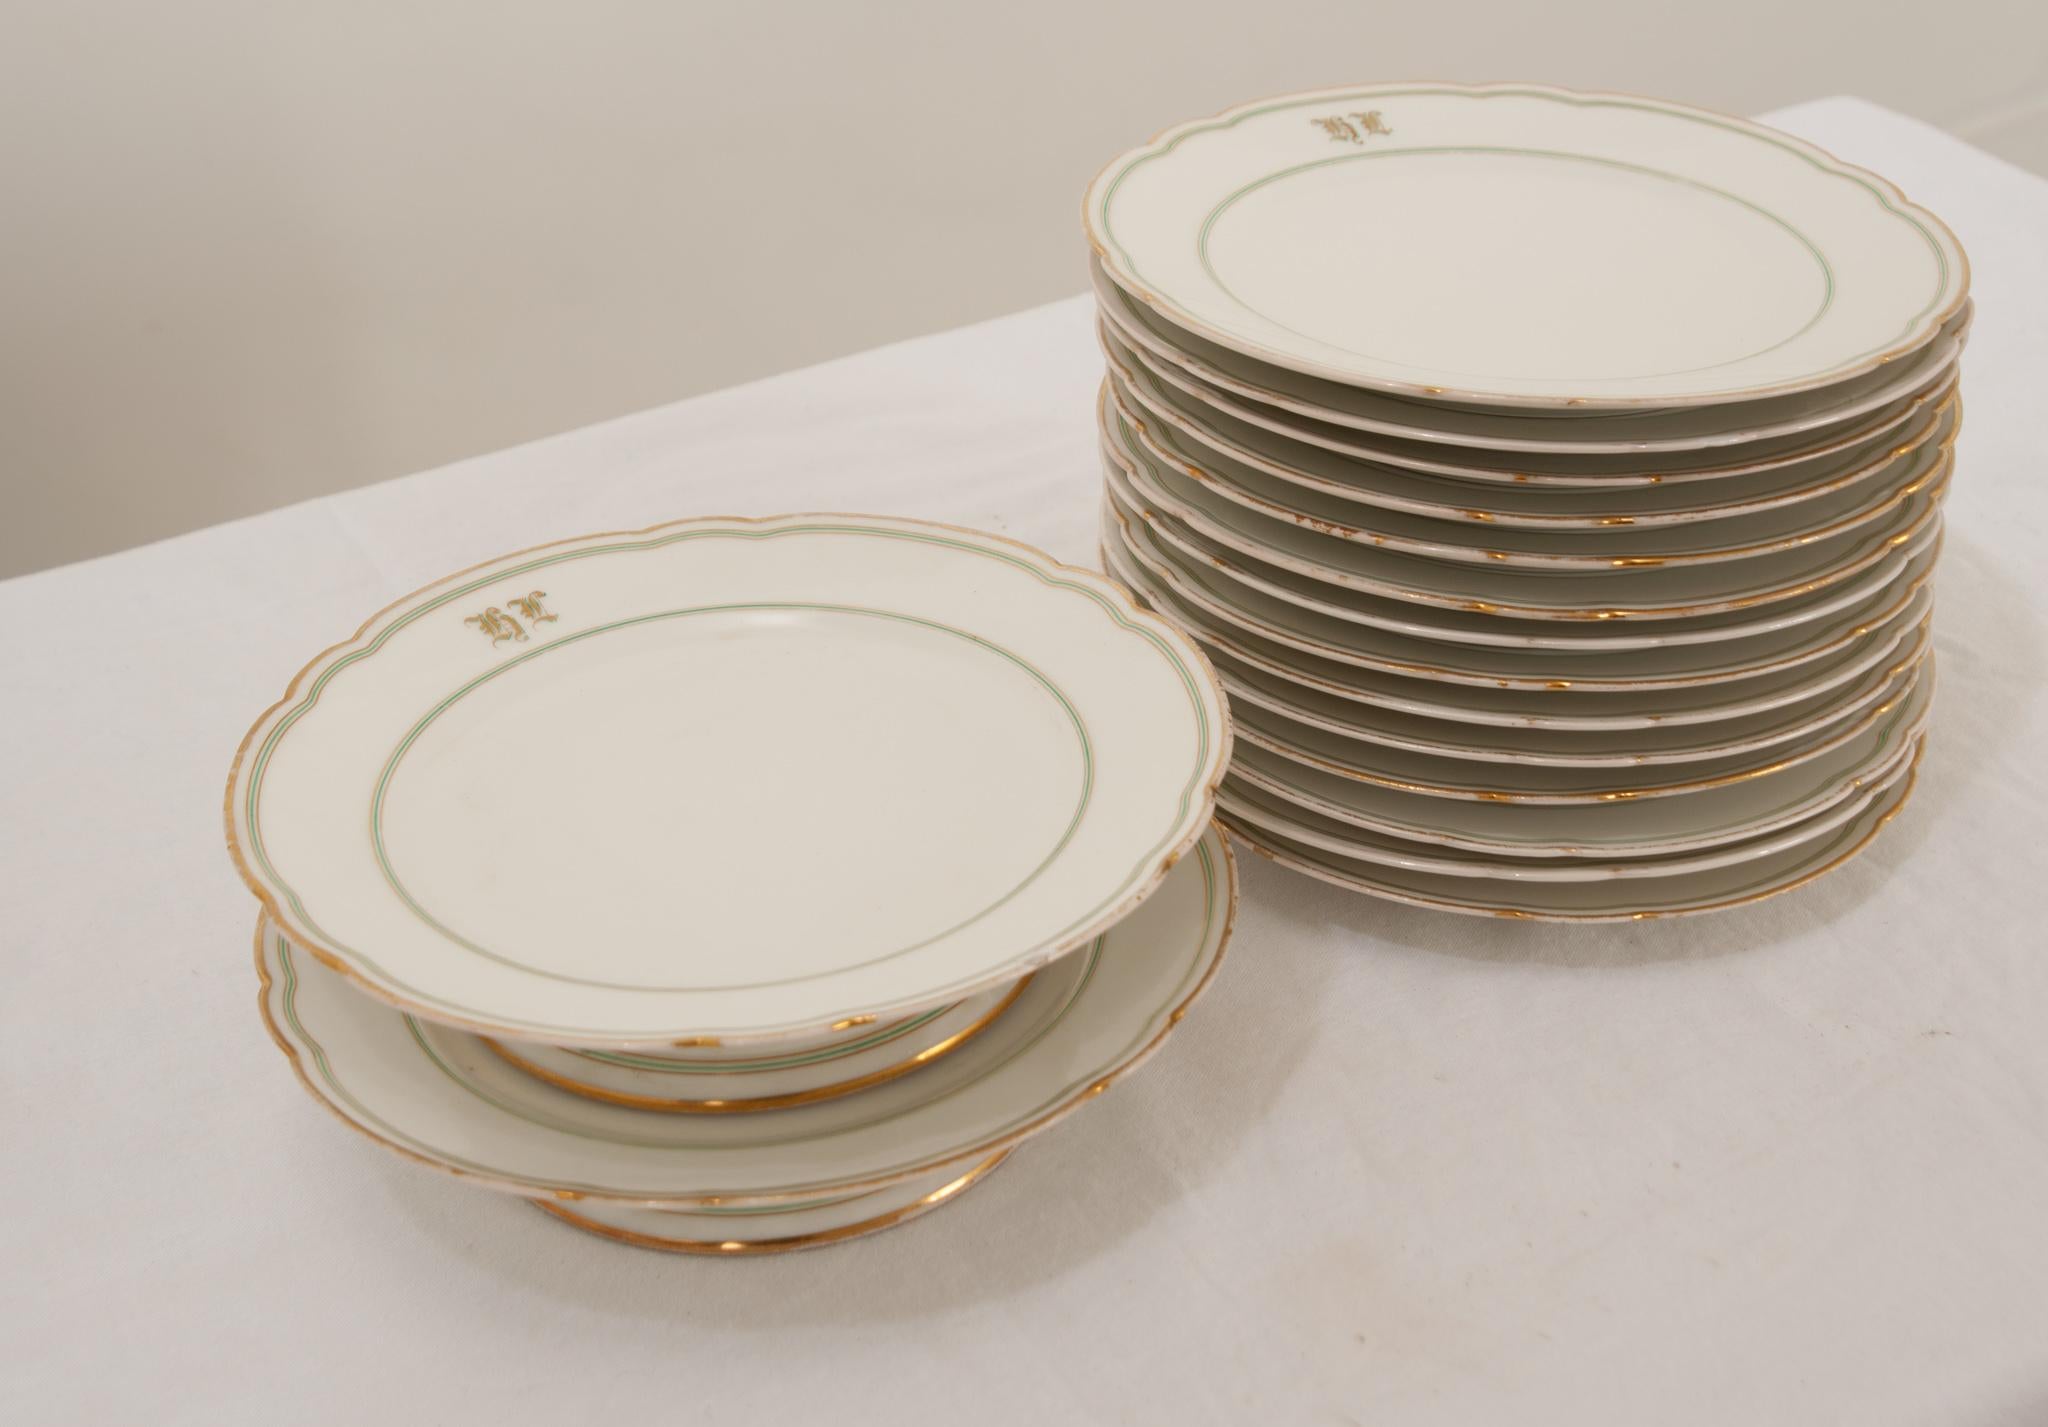 This charming 16 piece Old Paris service will elevate your dining experience to the next level. Vibrant green rings and initials “KL” are accented with gold. On the back of each plate is the maker's initials and location are marked in red cursive-